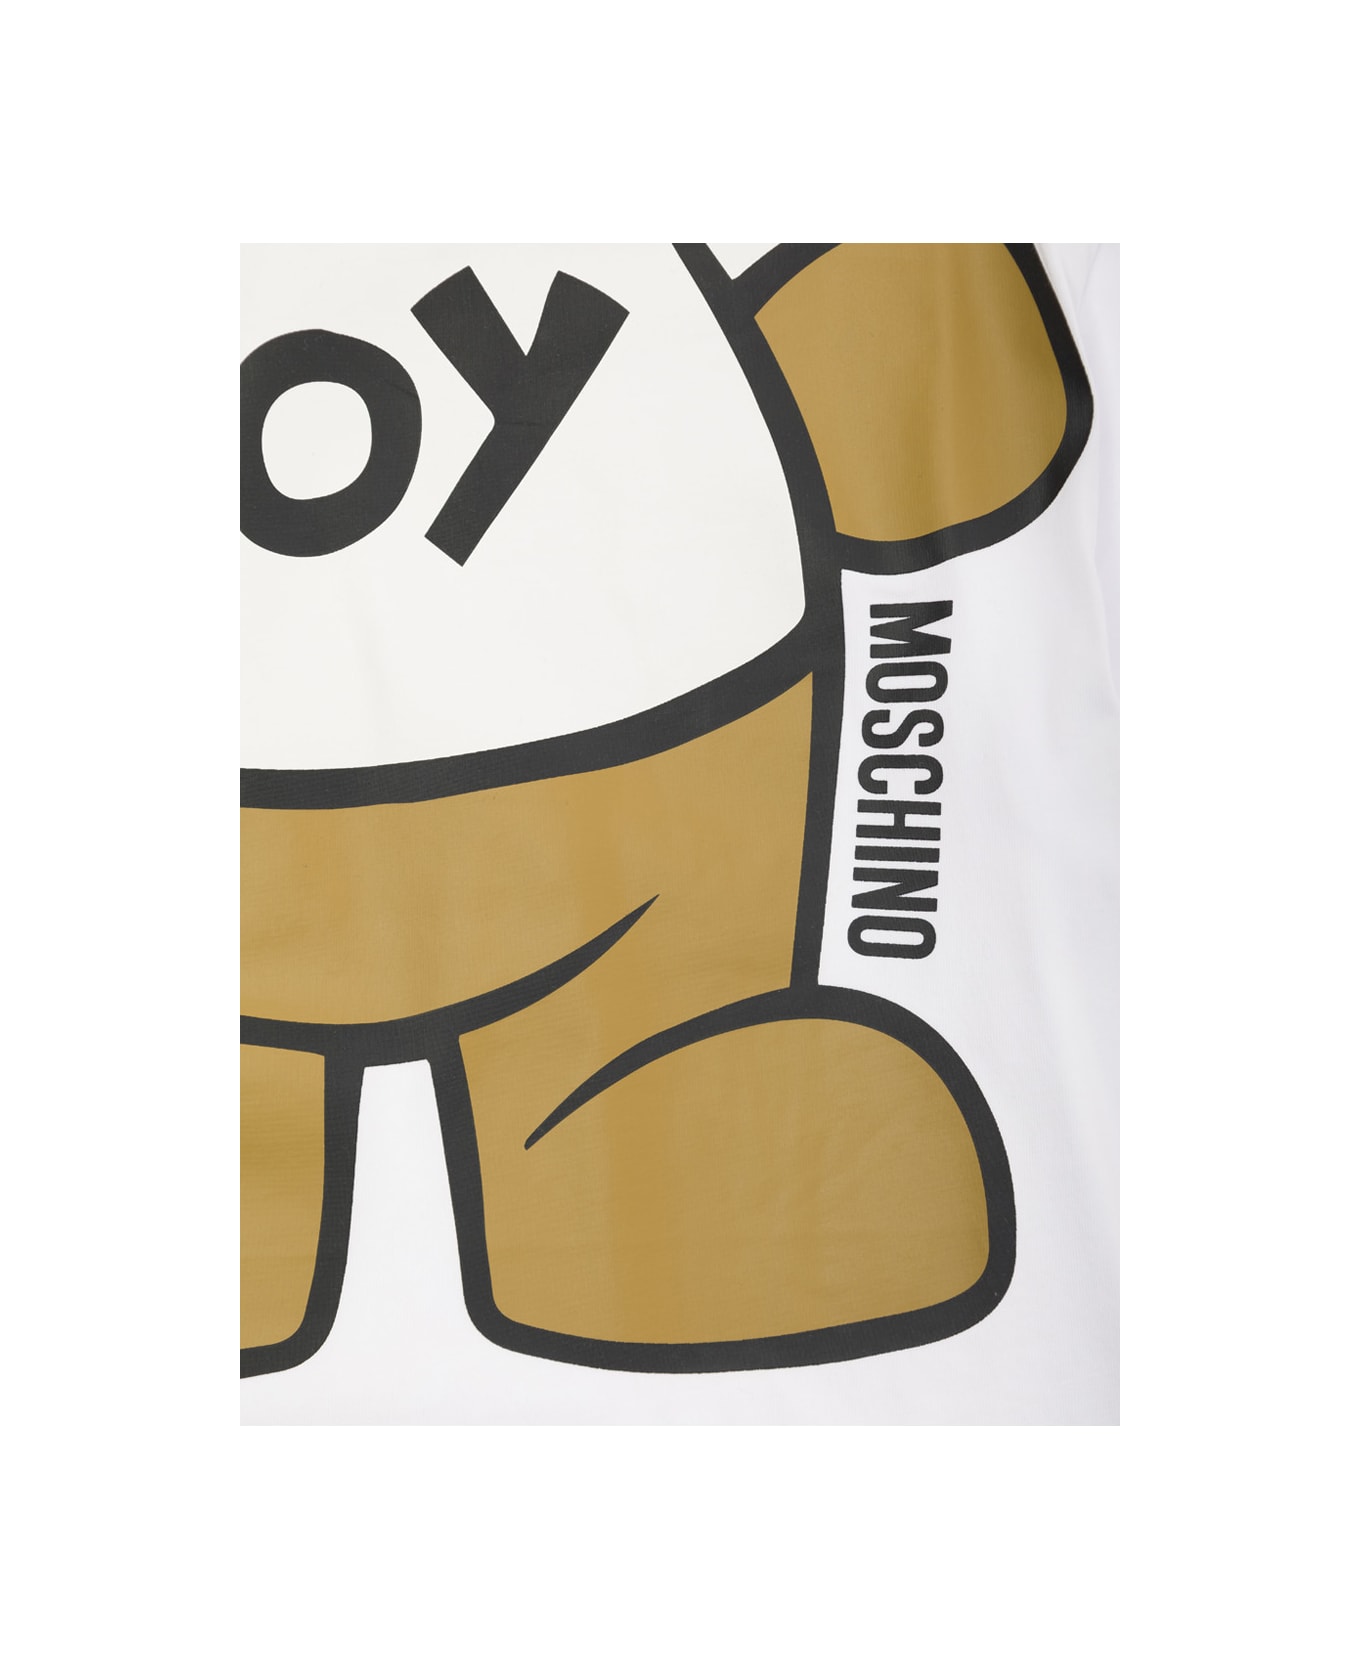 Moschino White T-shirt With Teddy Bear Print In Cotton Boy - WHITE